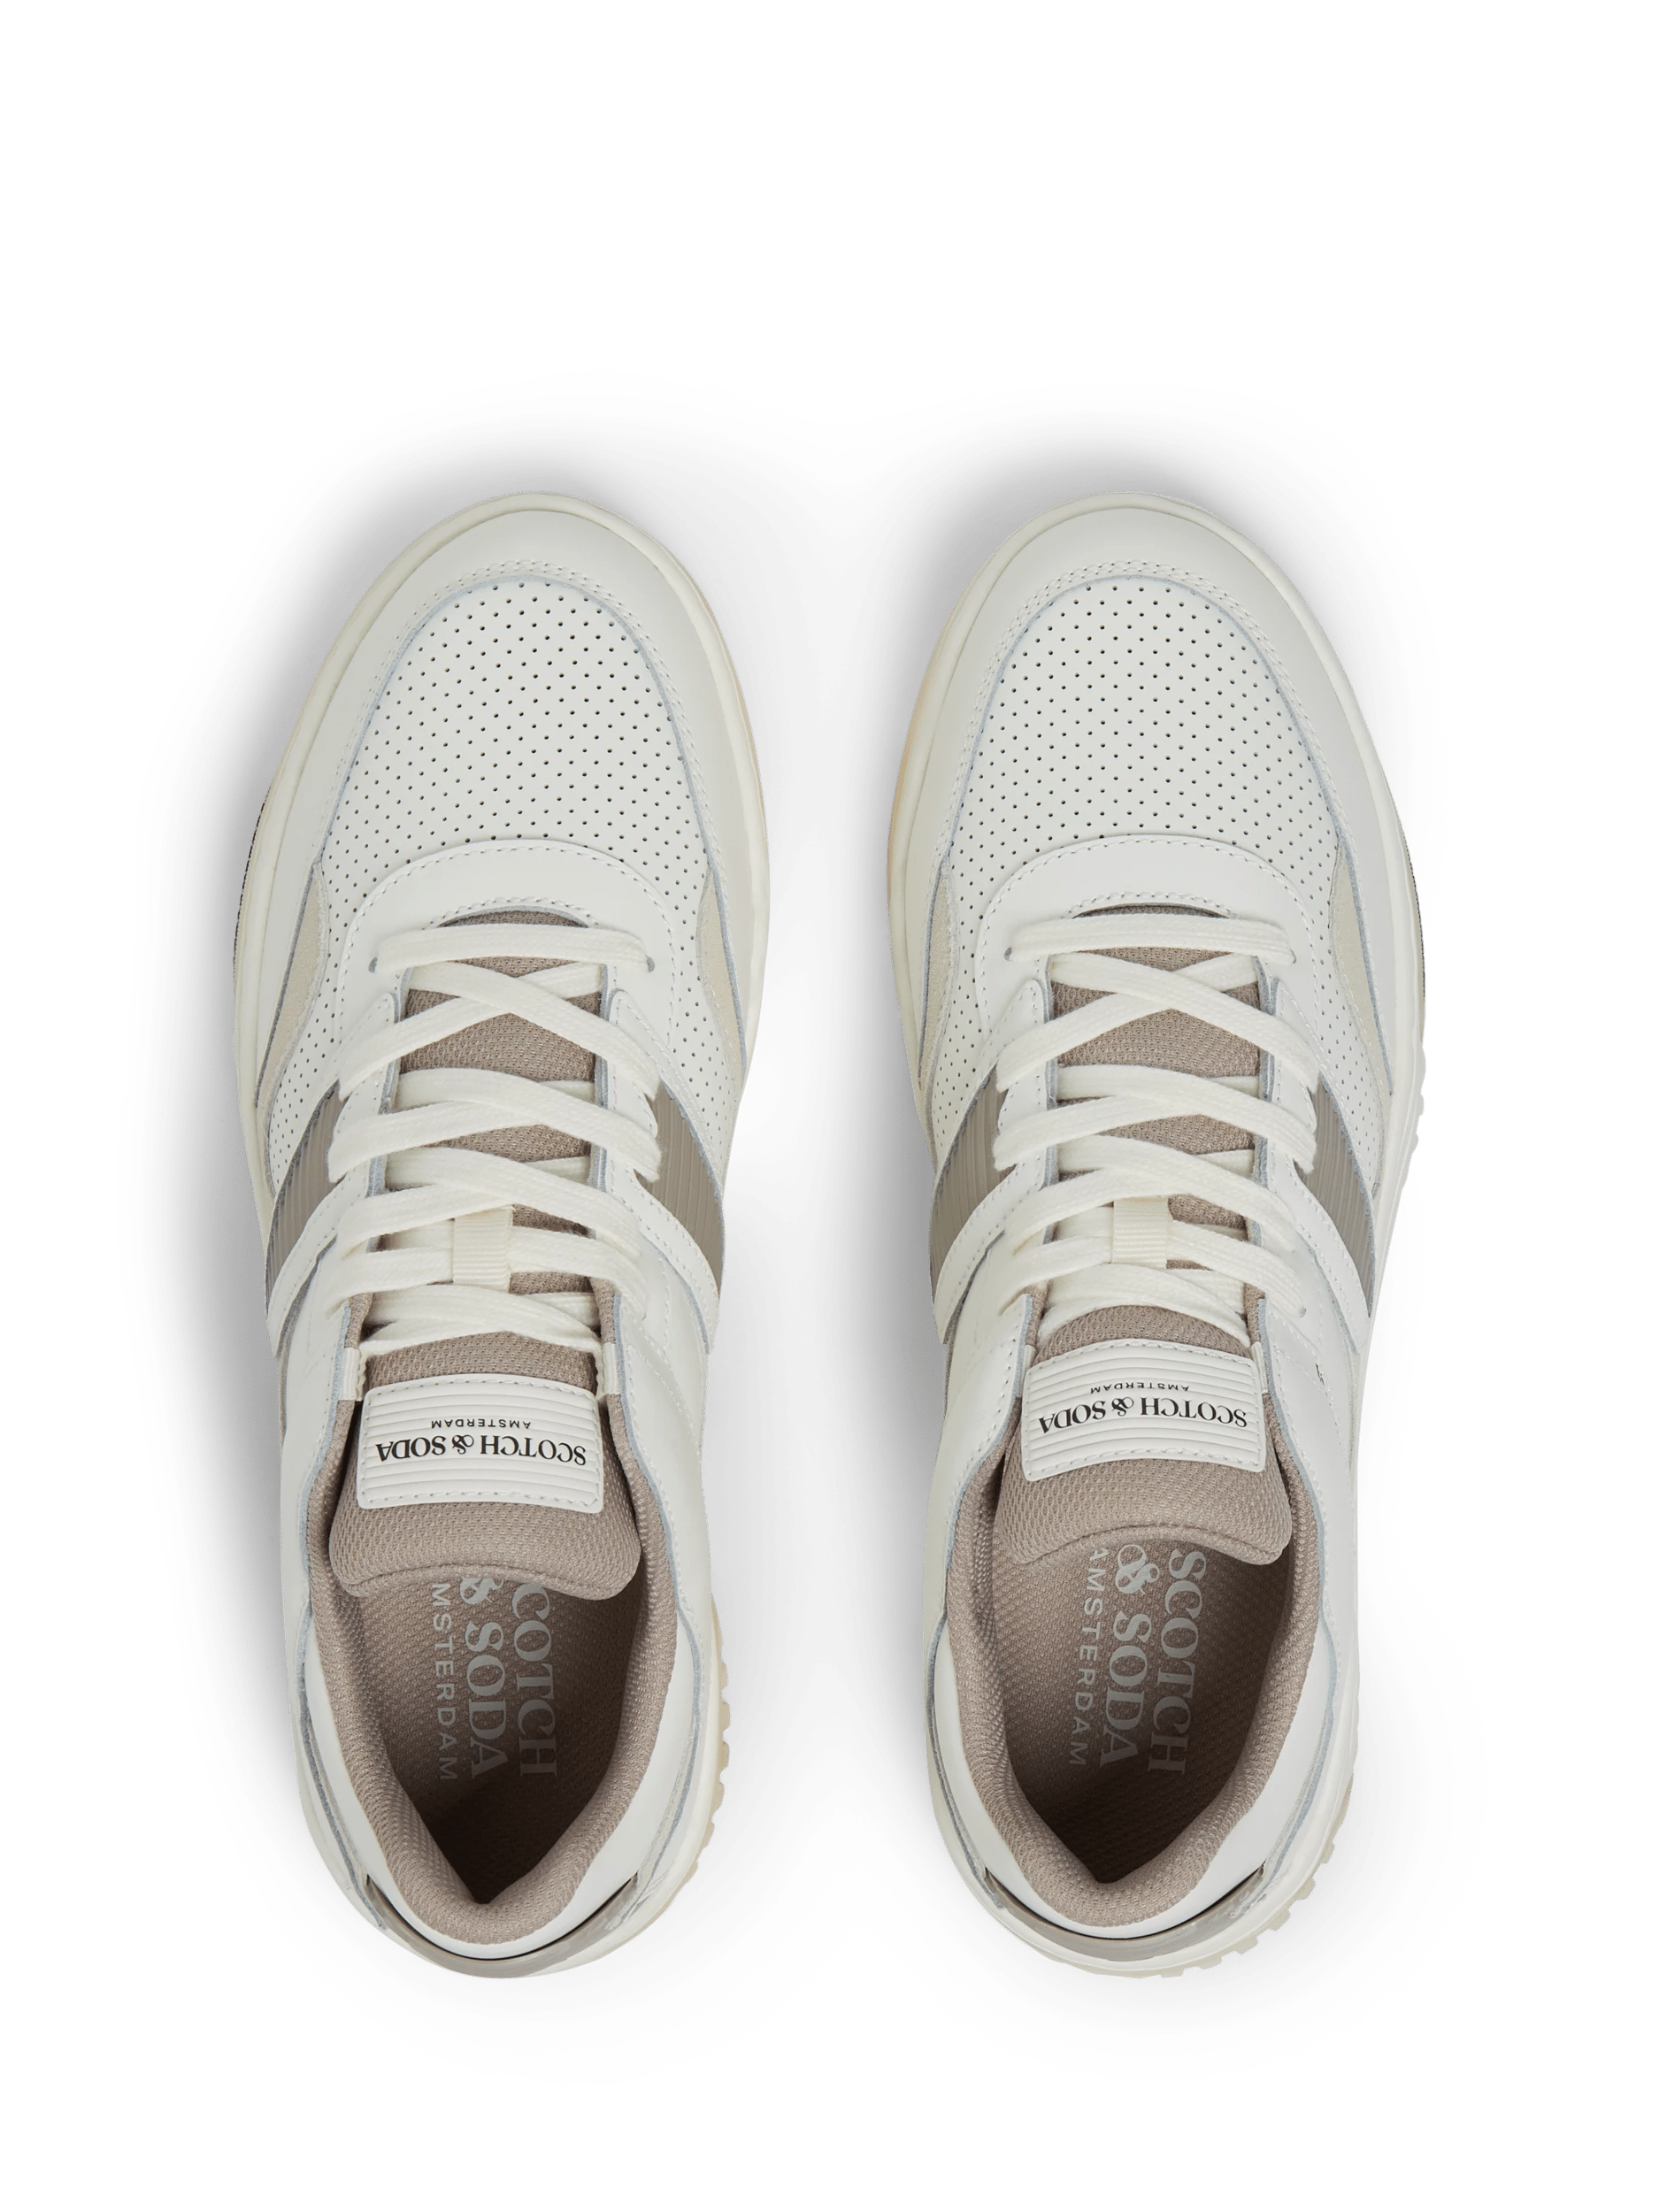 Scotch & Soda New Cup leather & suede sneaker TOP